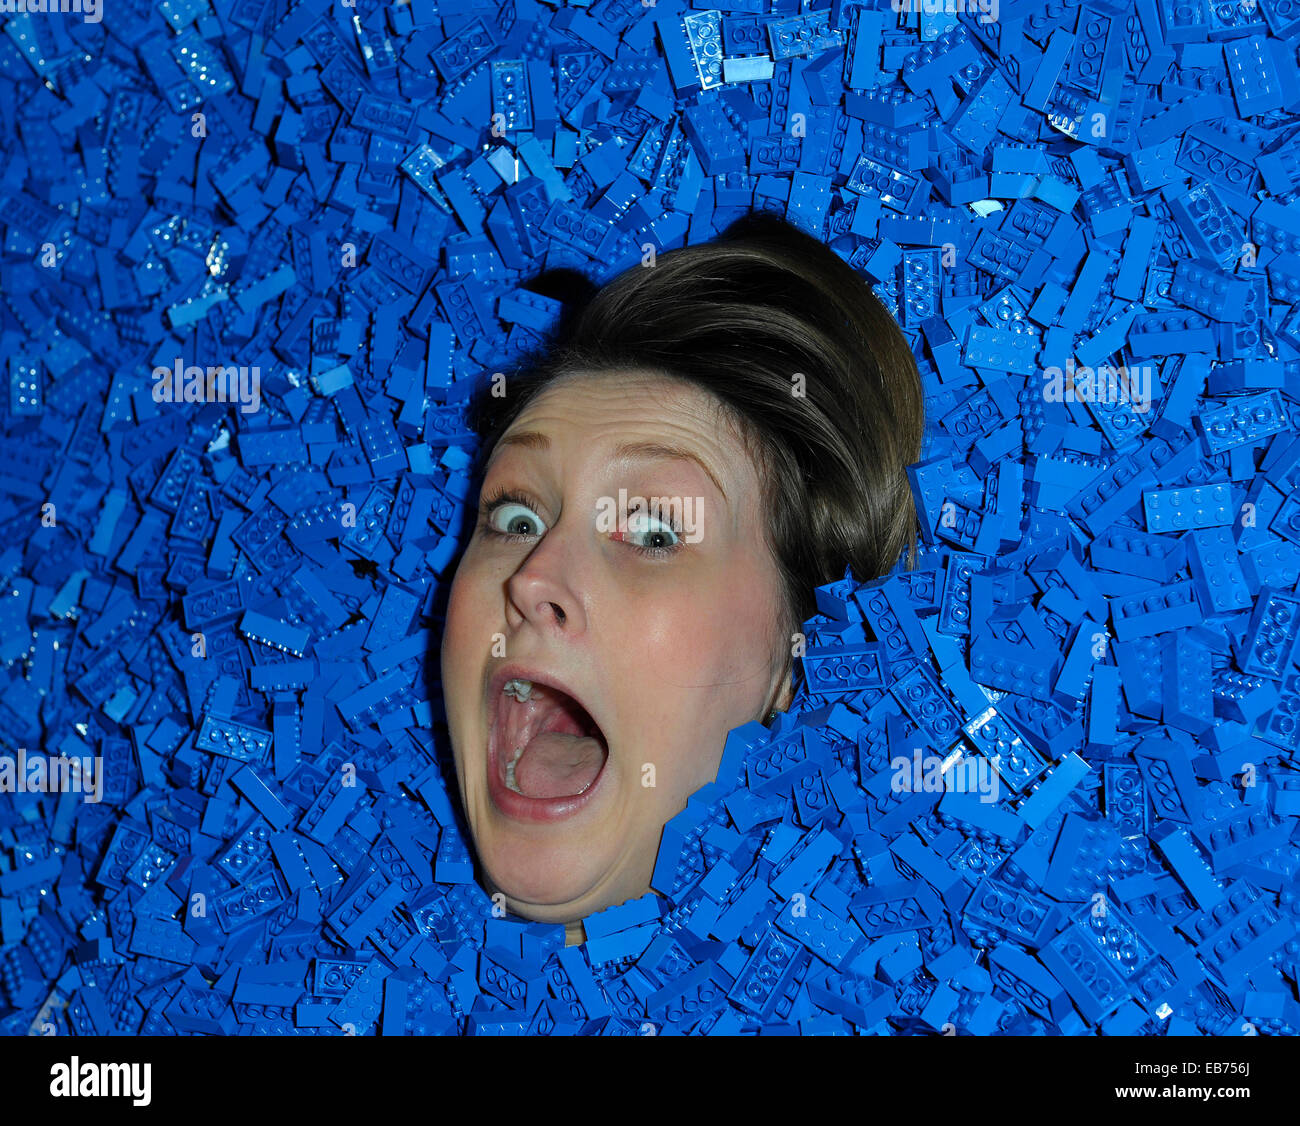 LEGO.  Alice, aged 27 from London and life long LEGO fan takes the opportunity to bury herself in a pit of blue LEGO bricks. Stock Photo